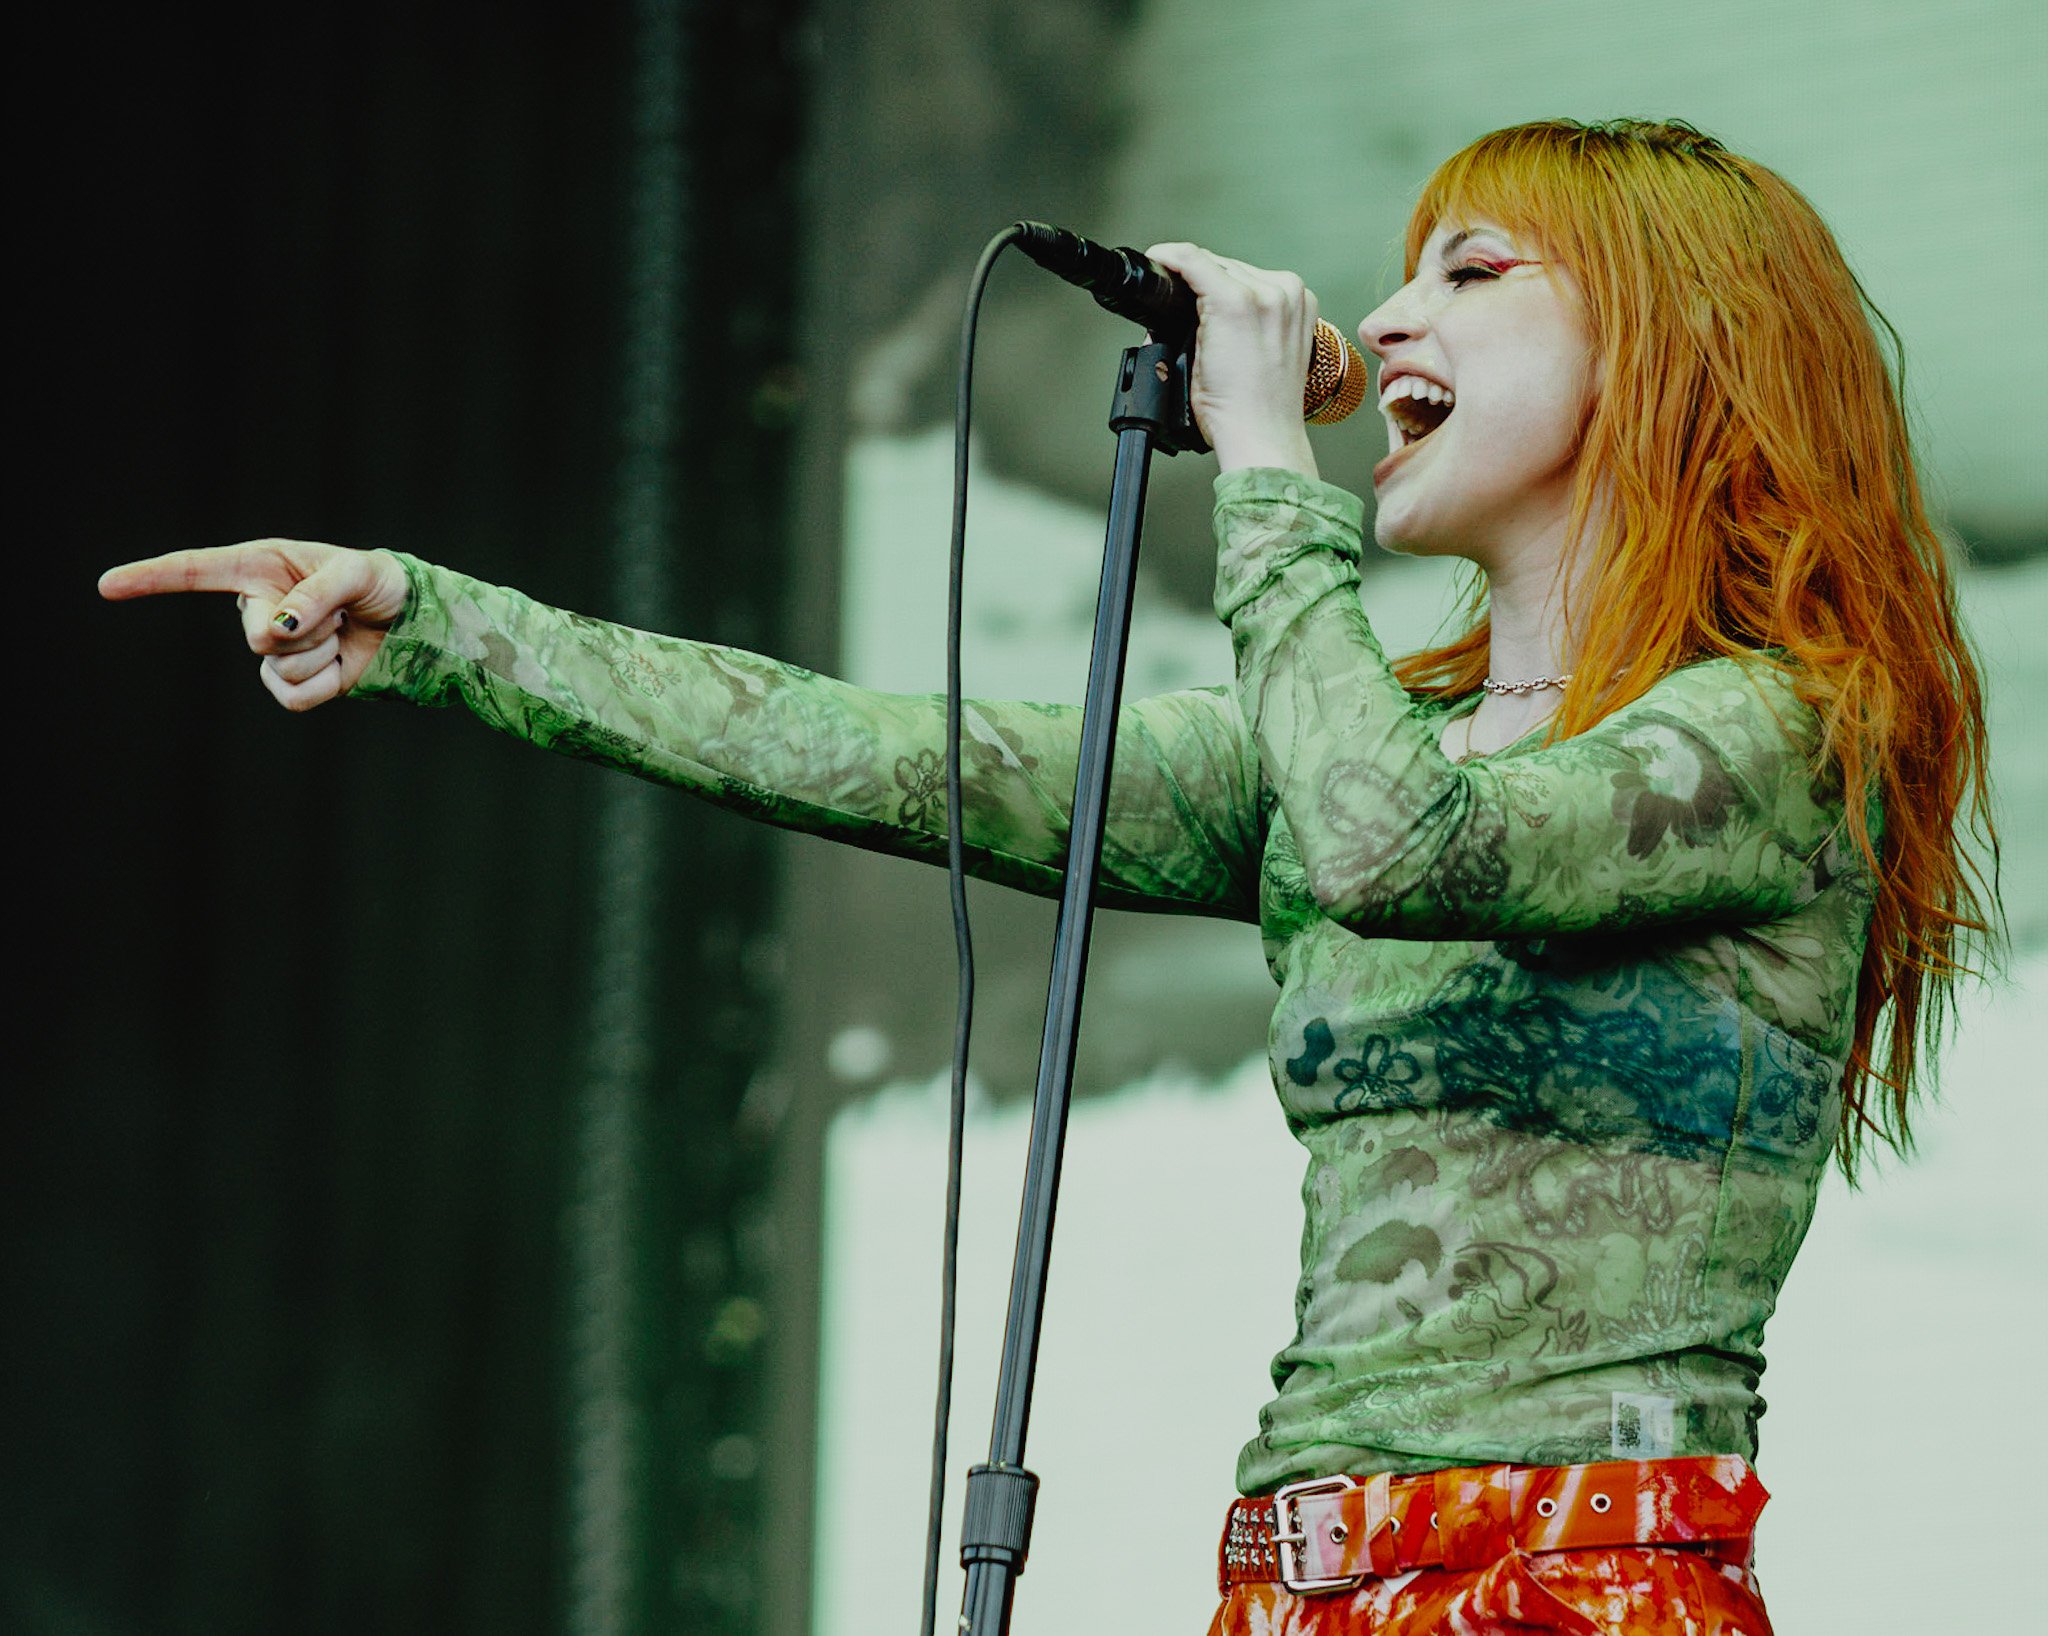  Iconic pop-punk band Paramore opens up its set with hits “Brick by Boring Brick” and “Hard Times.” 